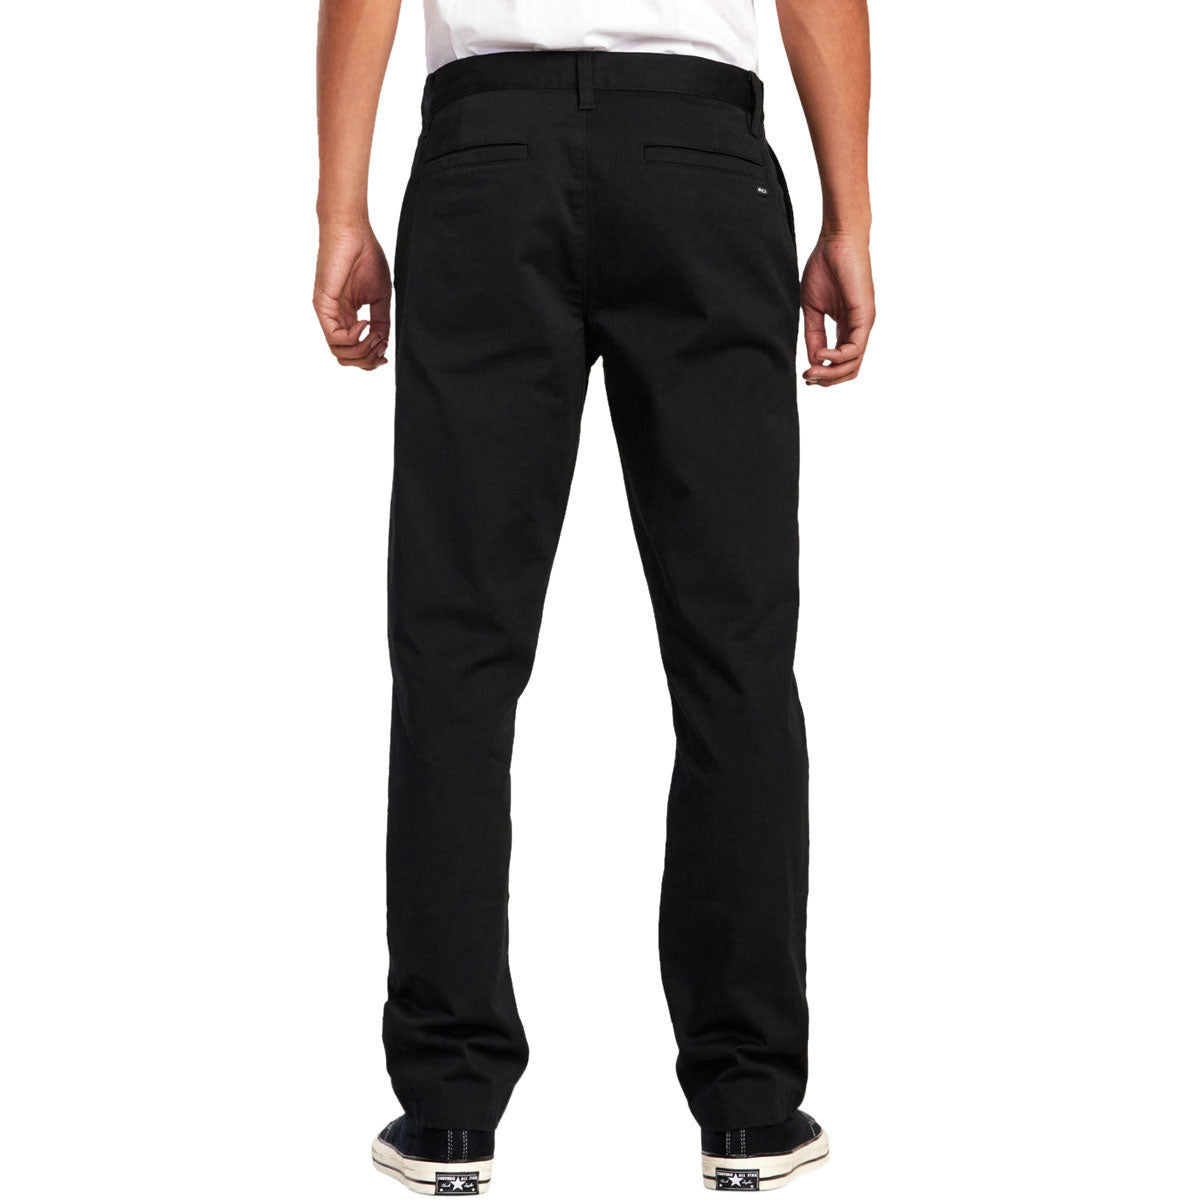 RVCA The Weekend Stretch Pants - New Black image 2